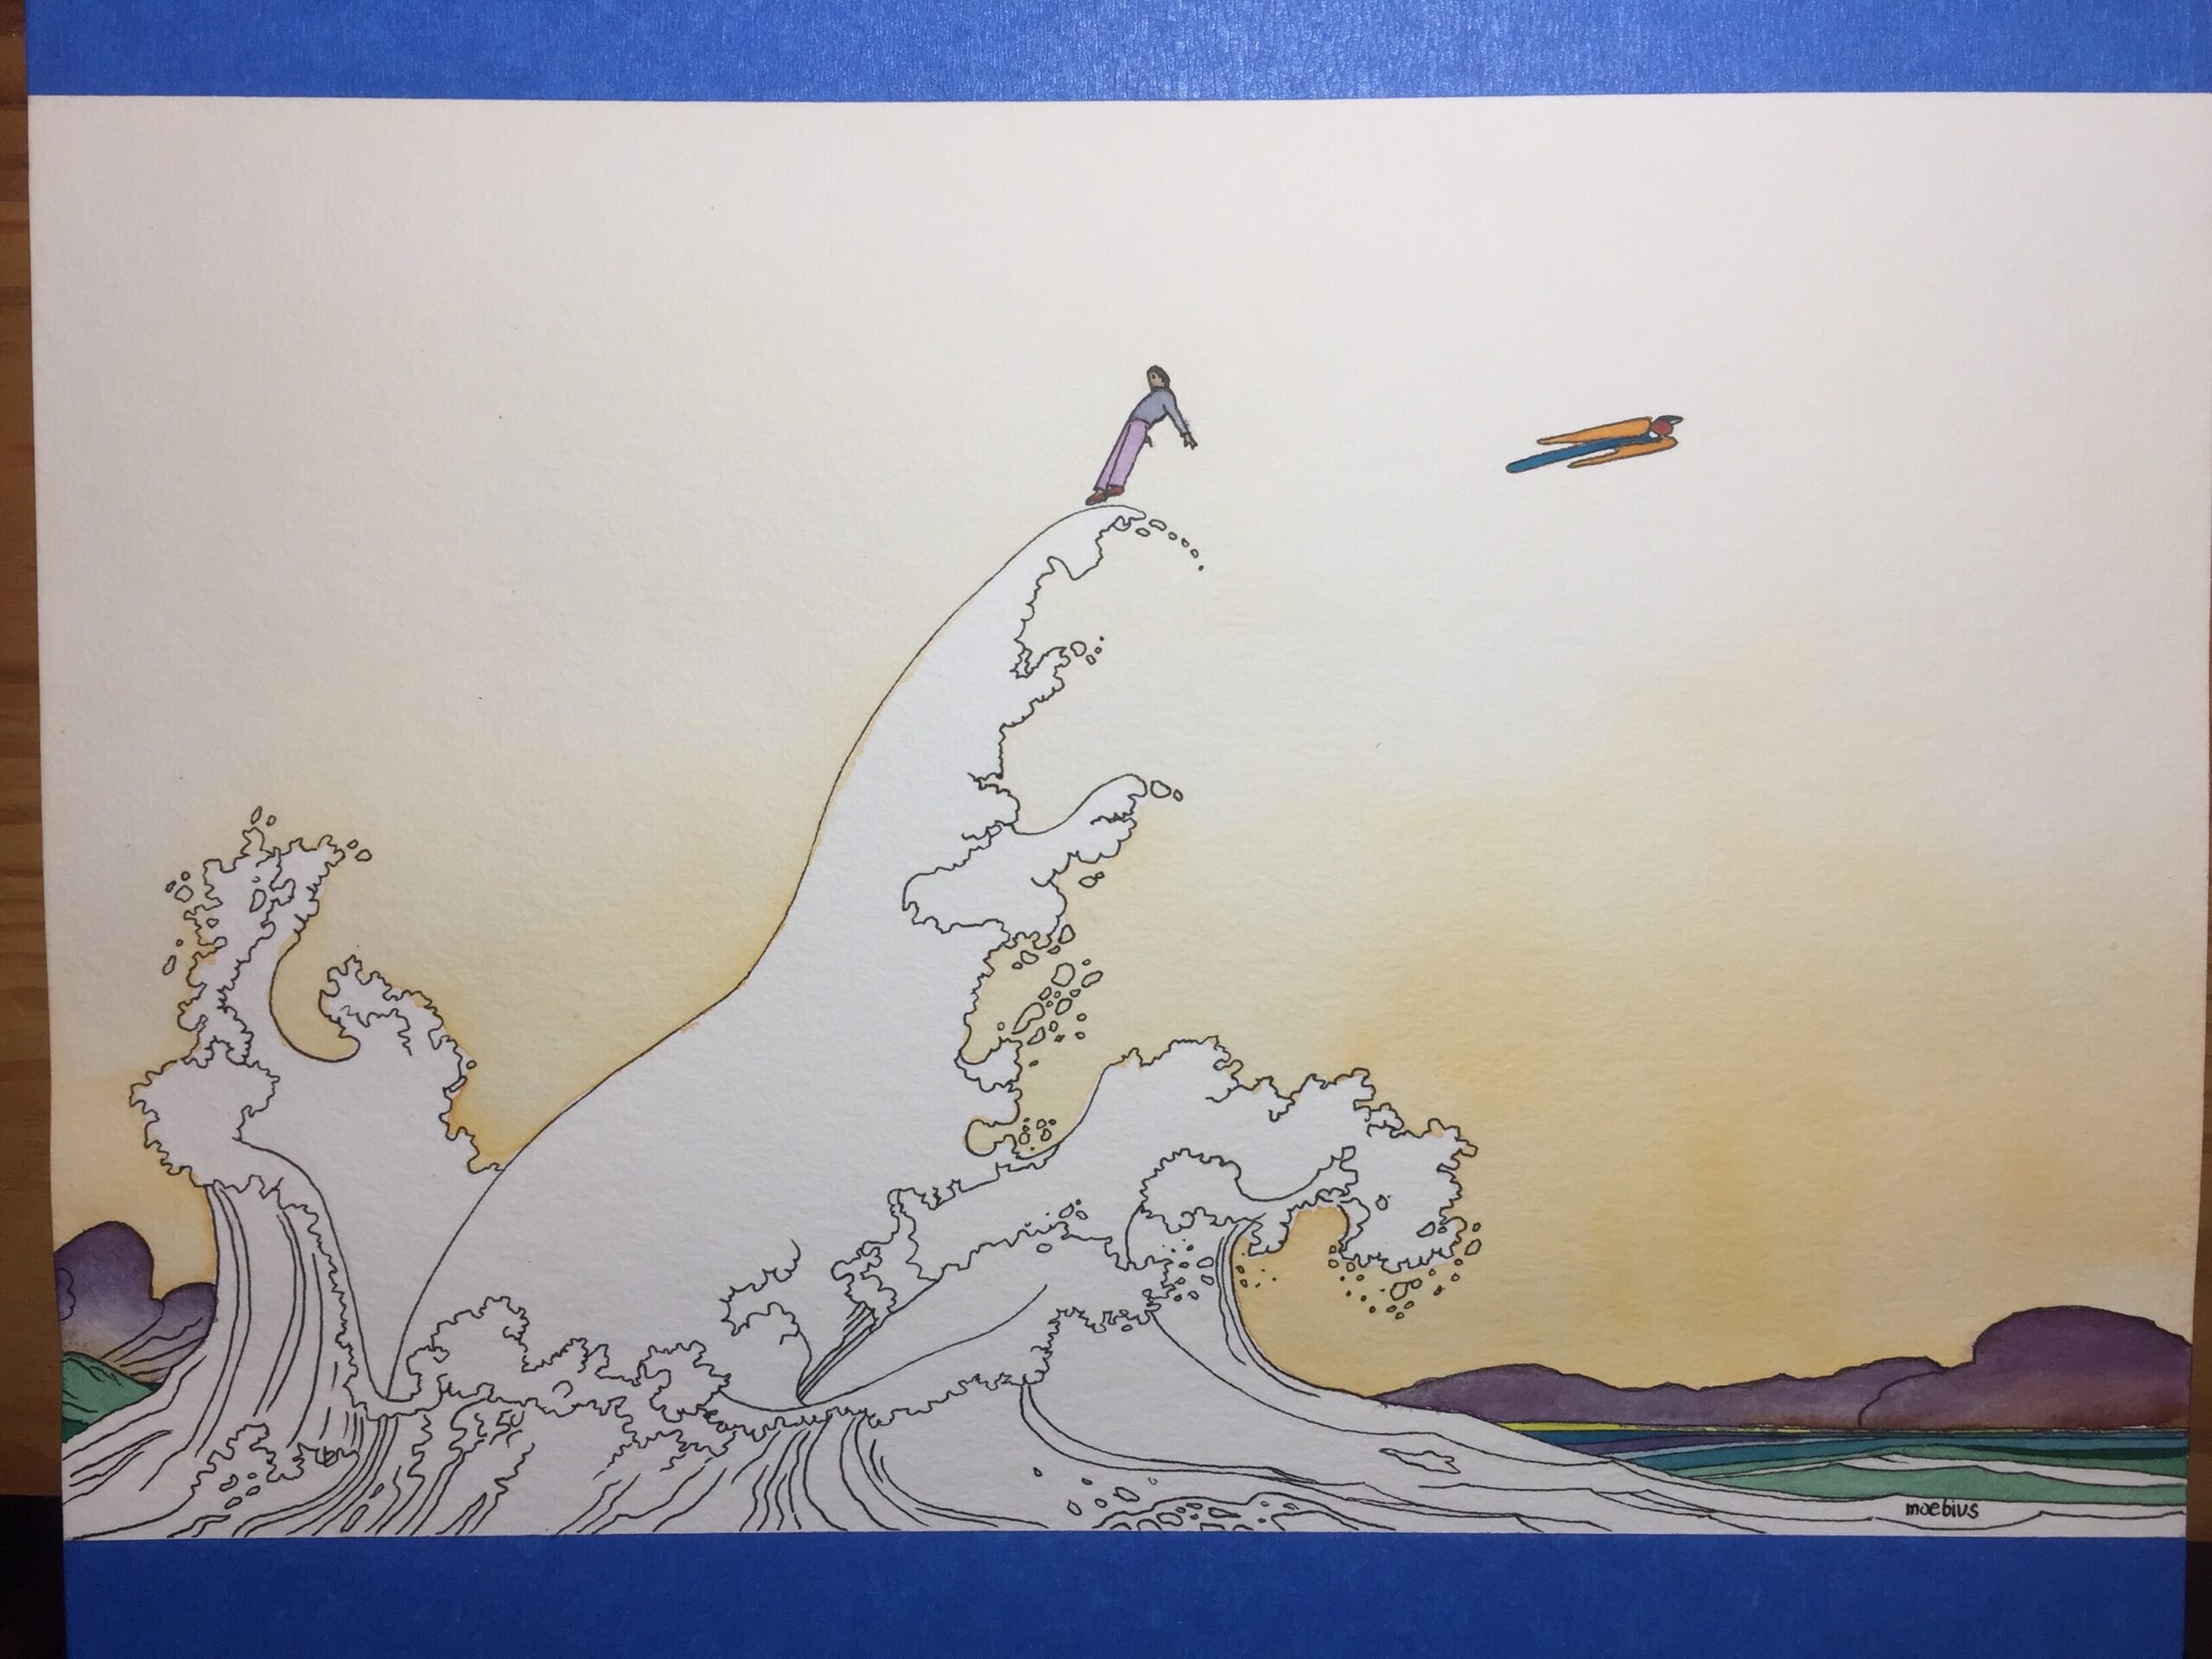 watercolour applied to the figure and the bird, the skyline, and greens and blues for the water around the wave